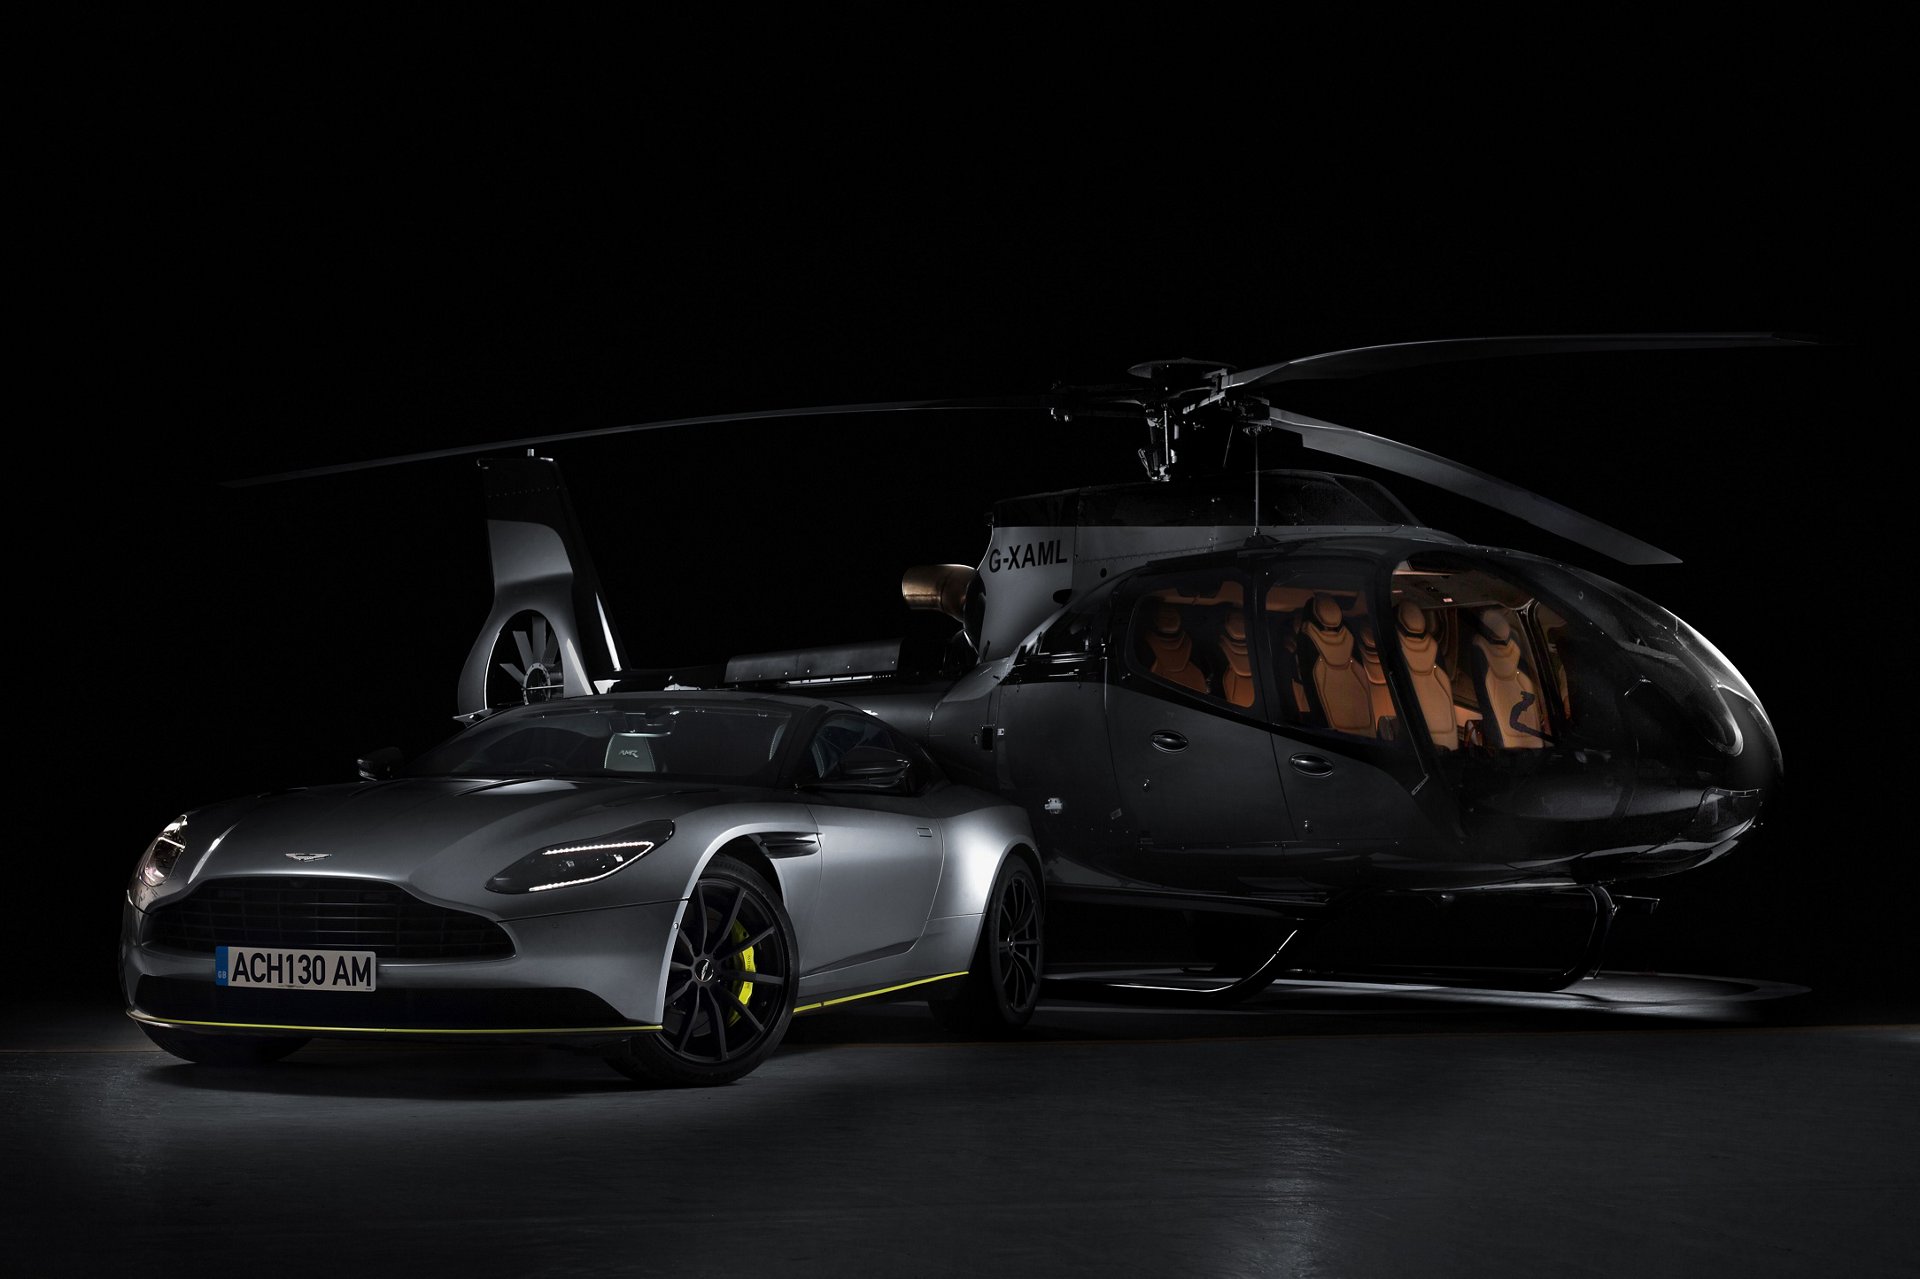 Airbus x Aston Martin Limited Edition Luxury Helicopter for $3.1 Million